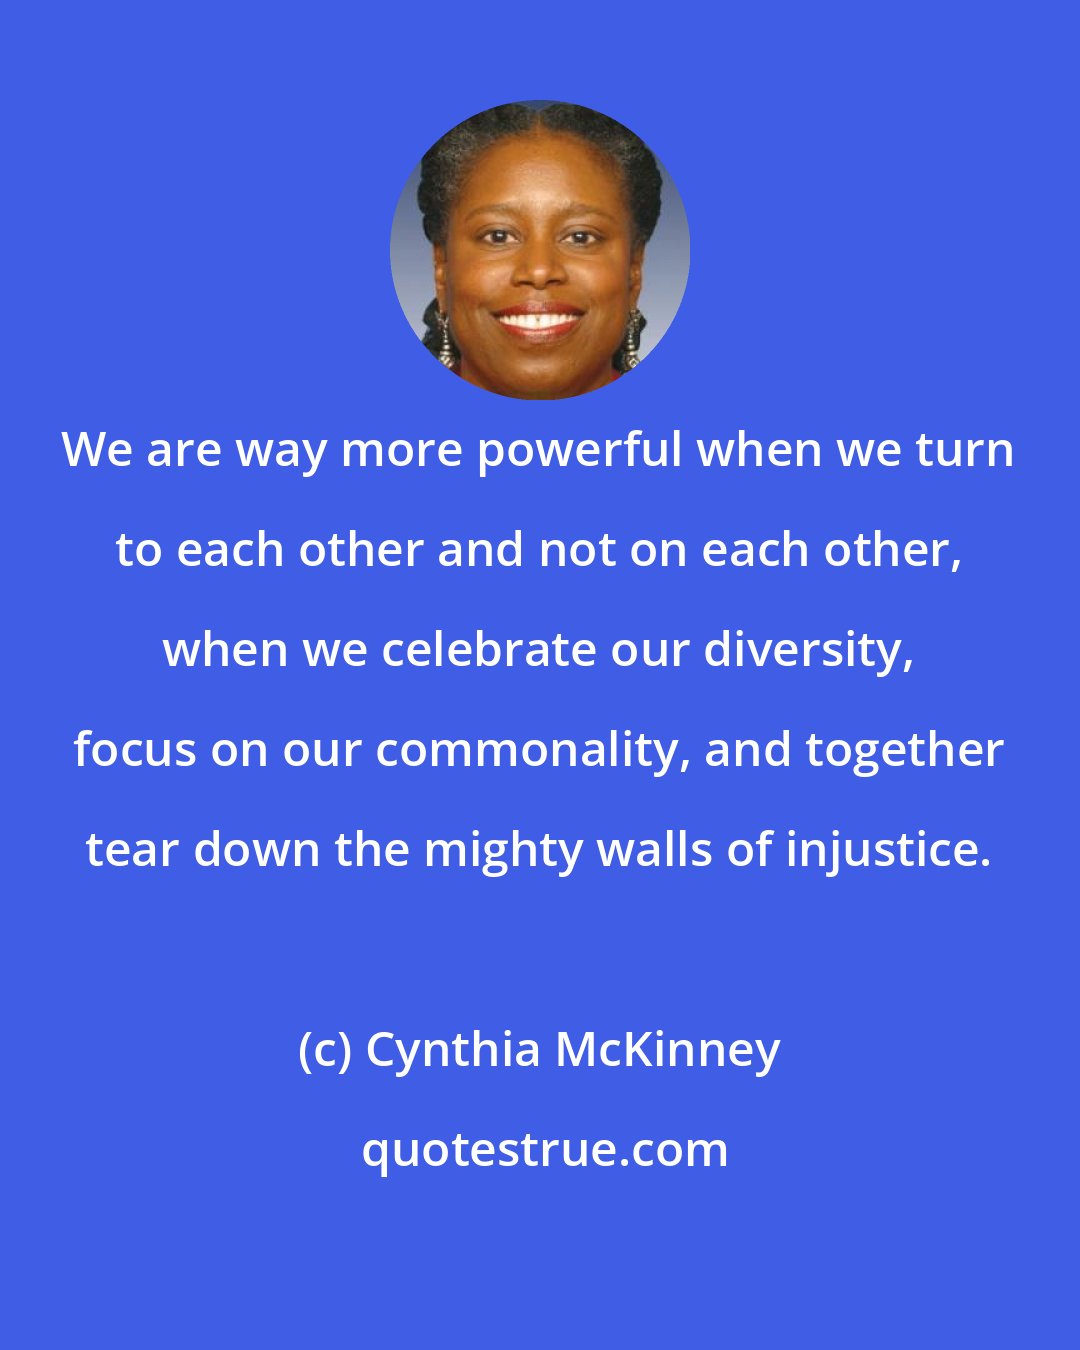 Cynthia McKinney: We are way more powerful when we turn to each other and not on each other, when we celebrate our diversity, focus on our commonality, and together tear down the mighty walls of injustice.